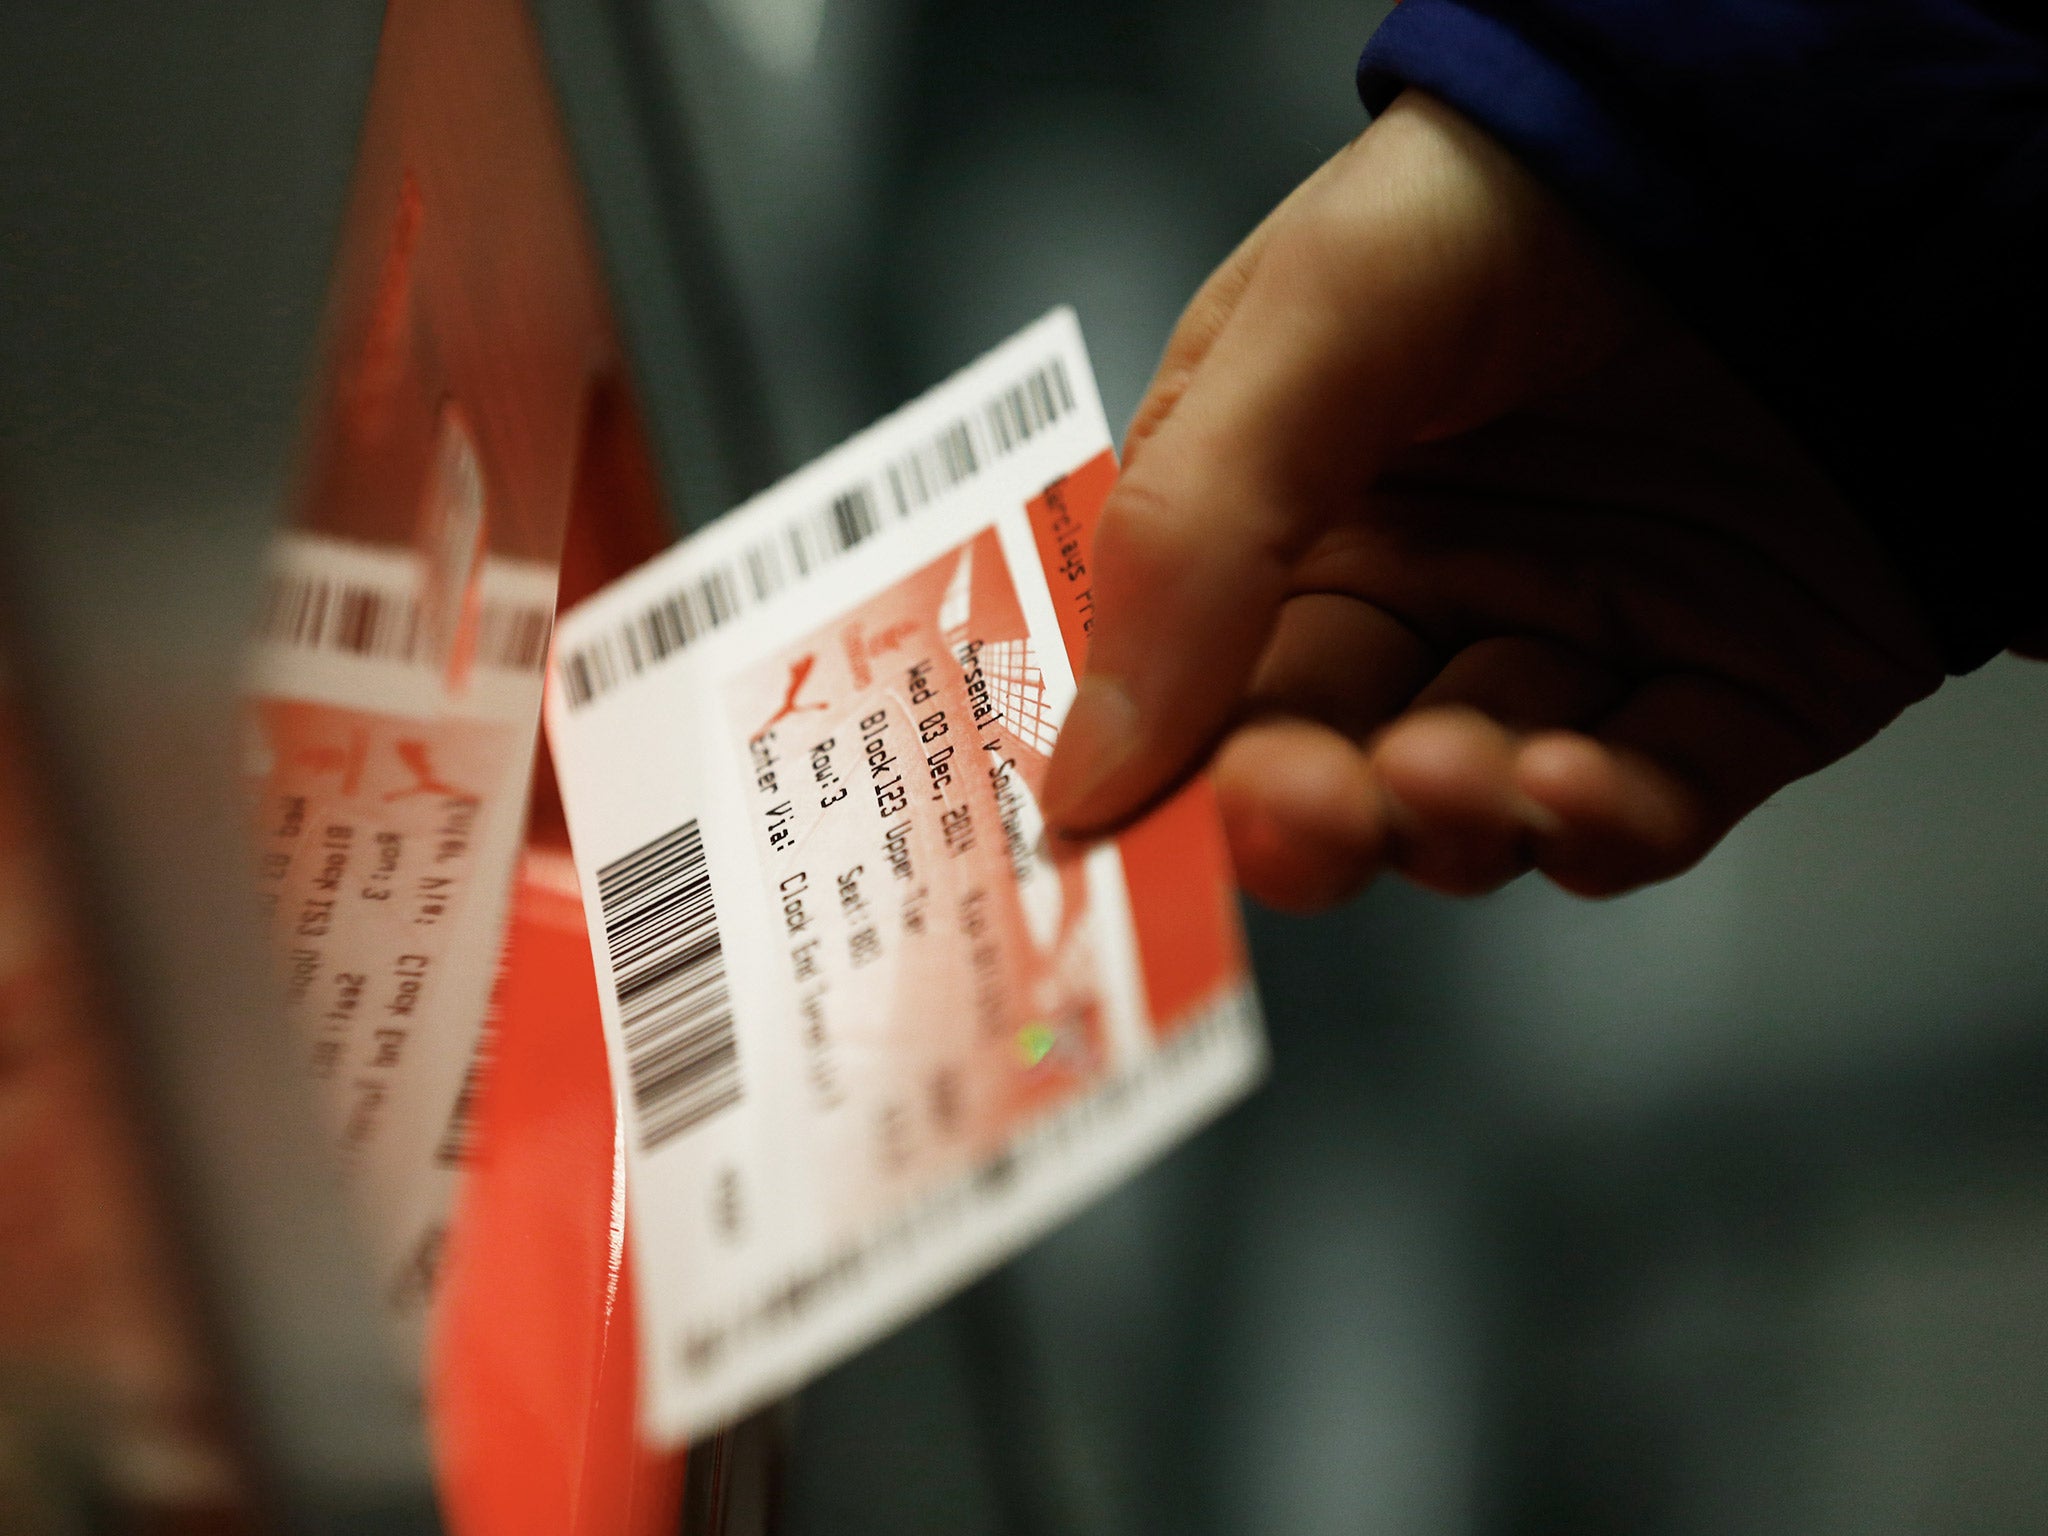 Just over two-thirds of top flight tickets have not been subject to price increases this season